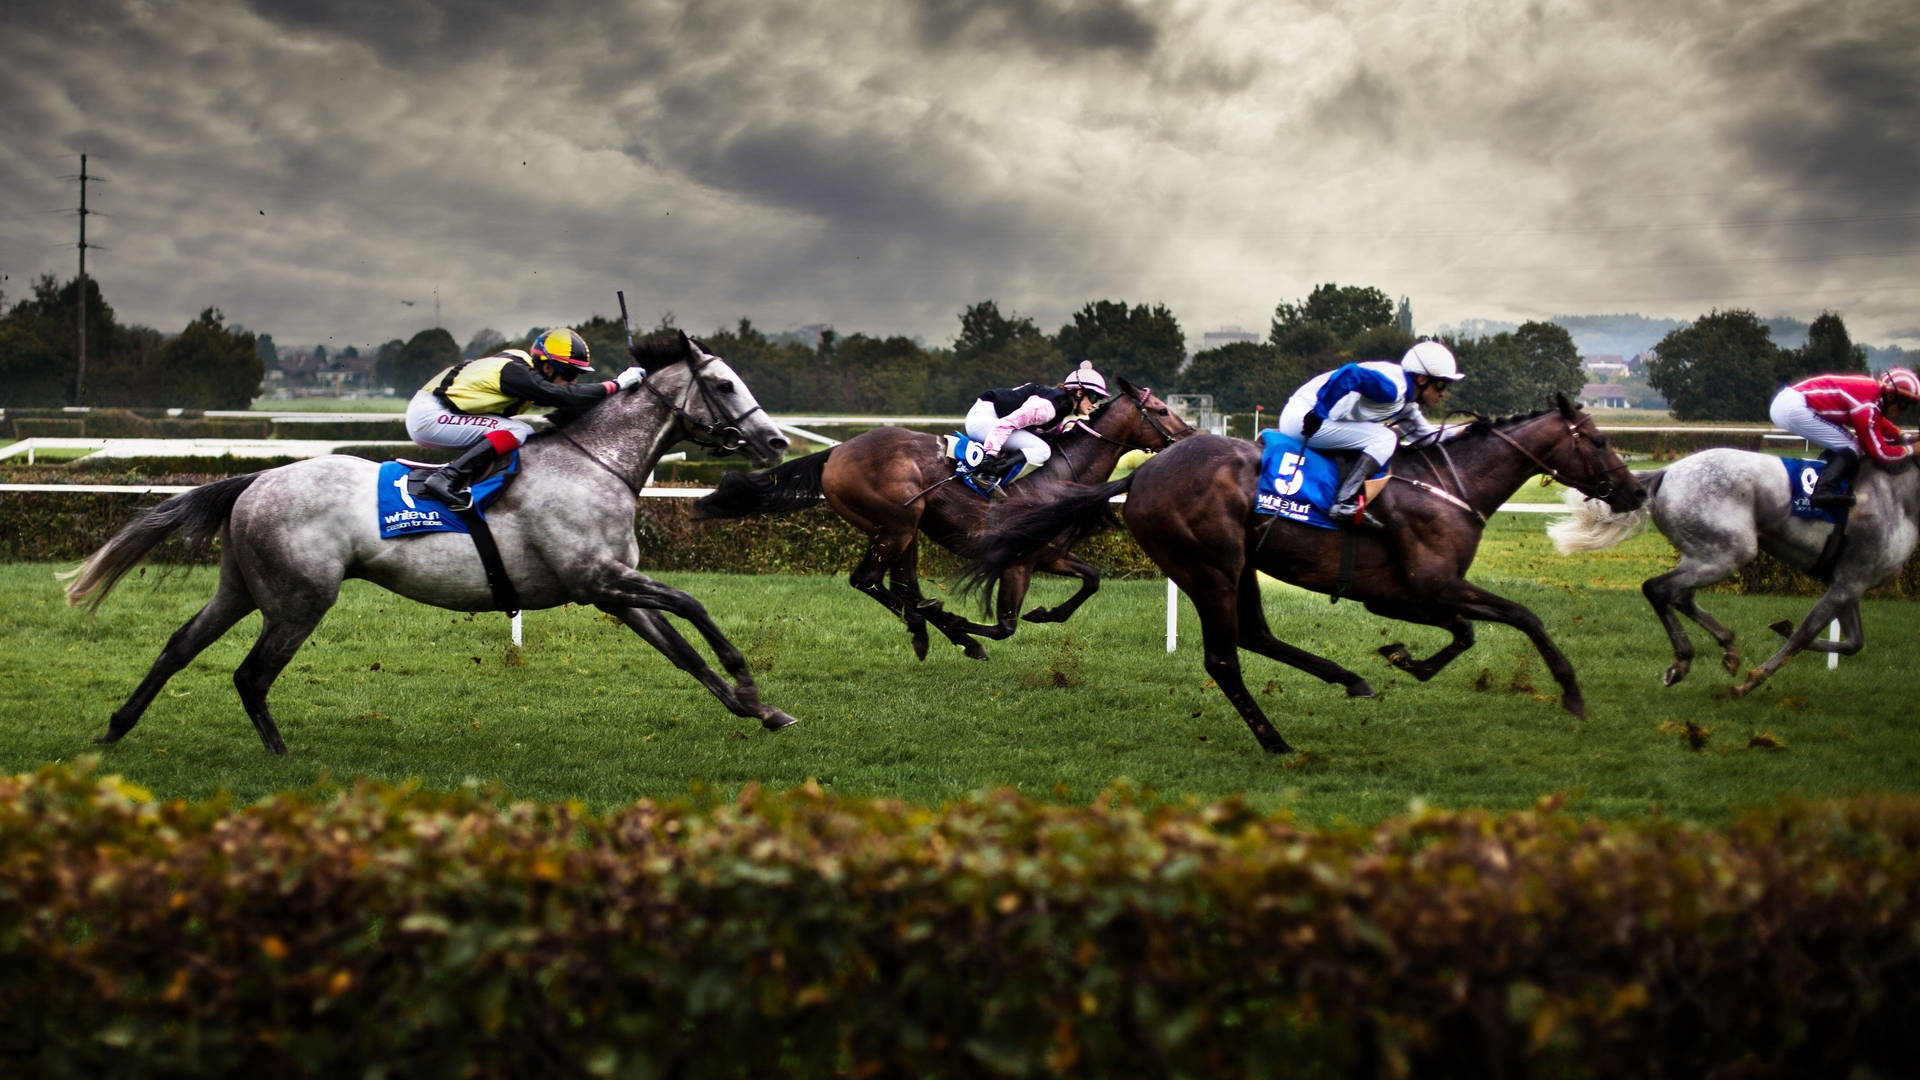 Horse Racing In A Bad Weather